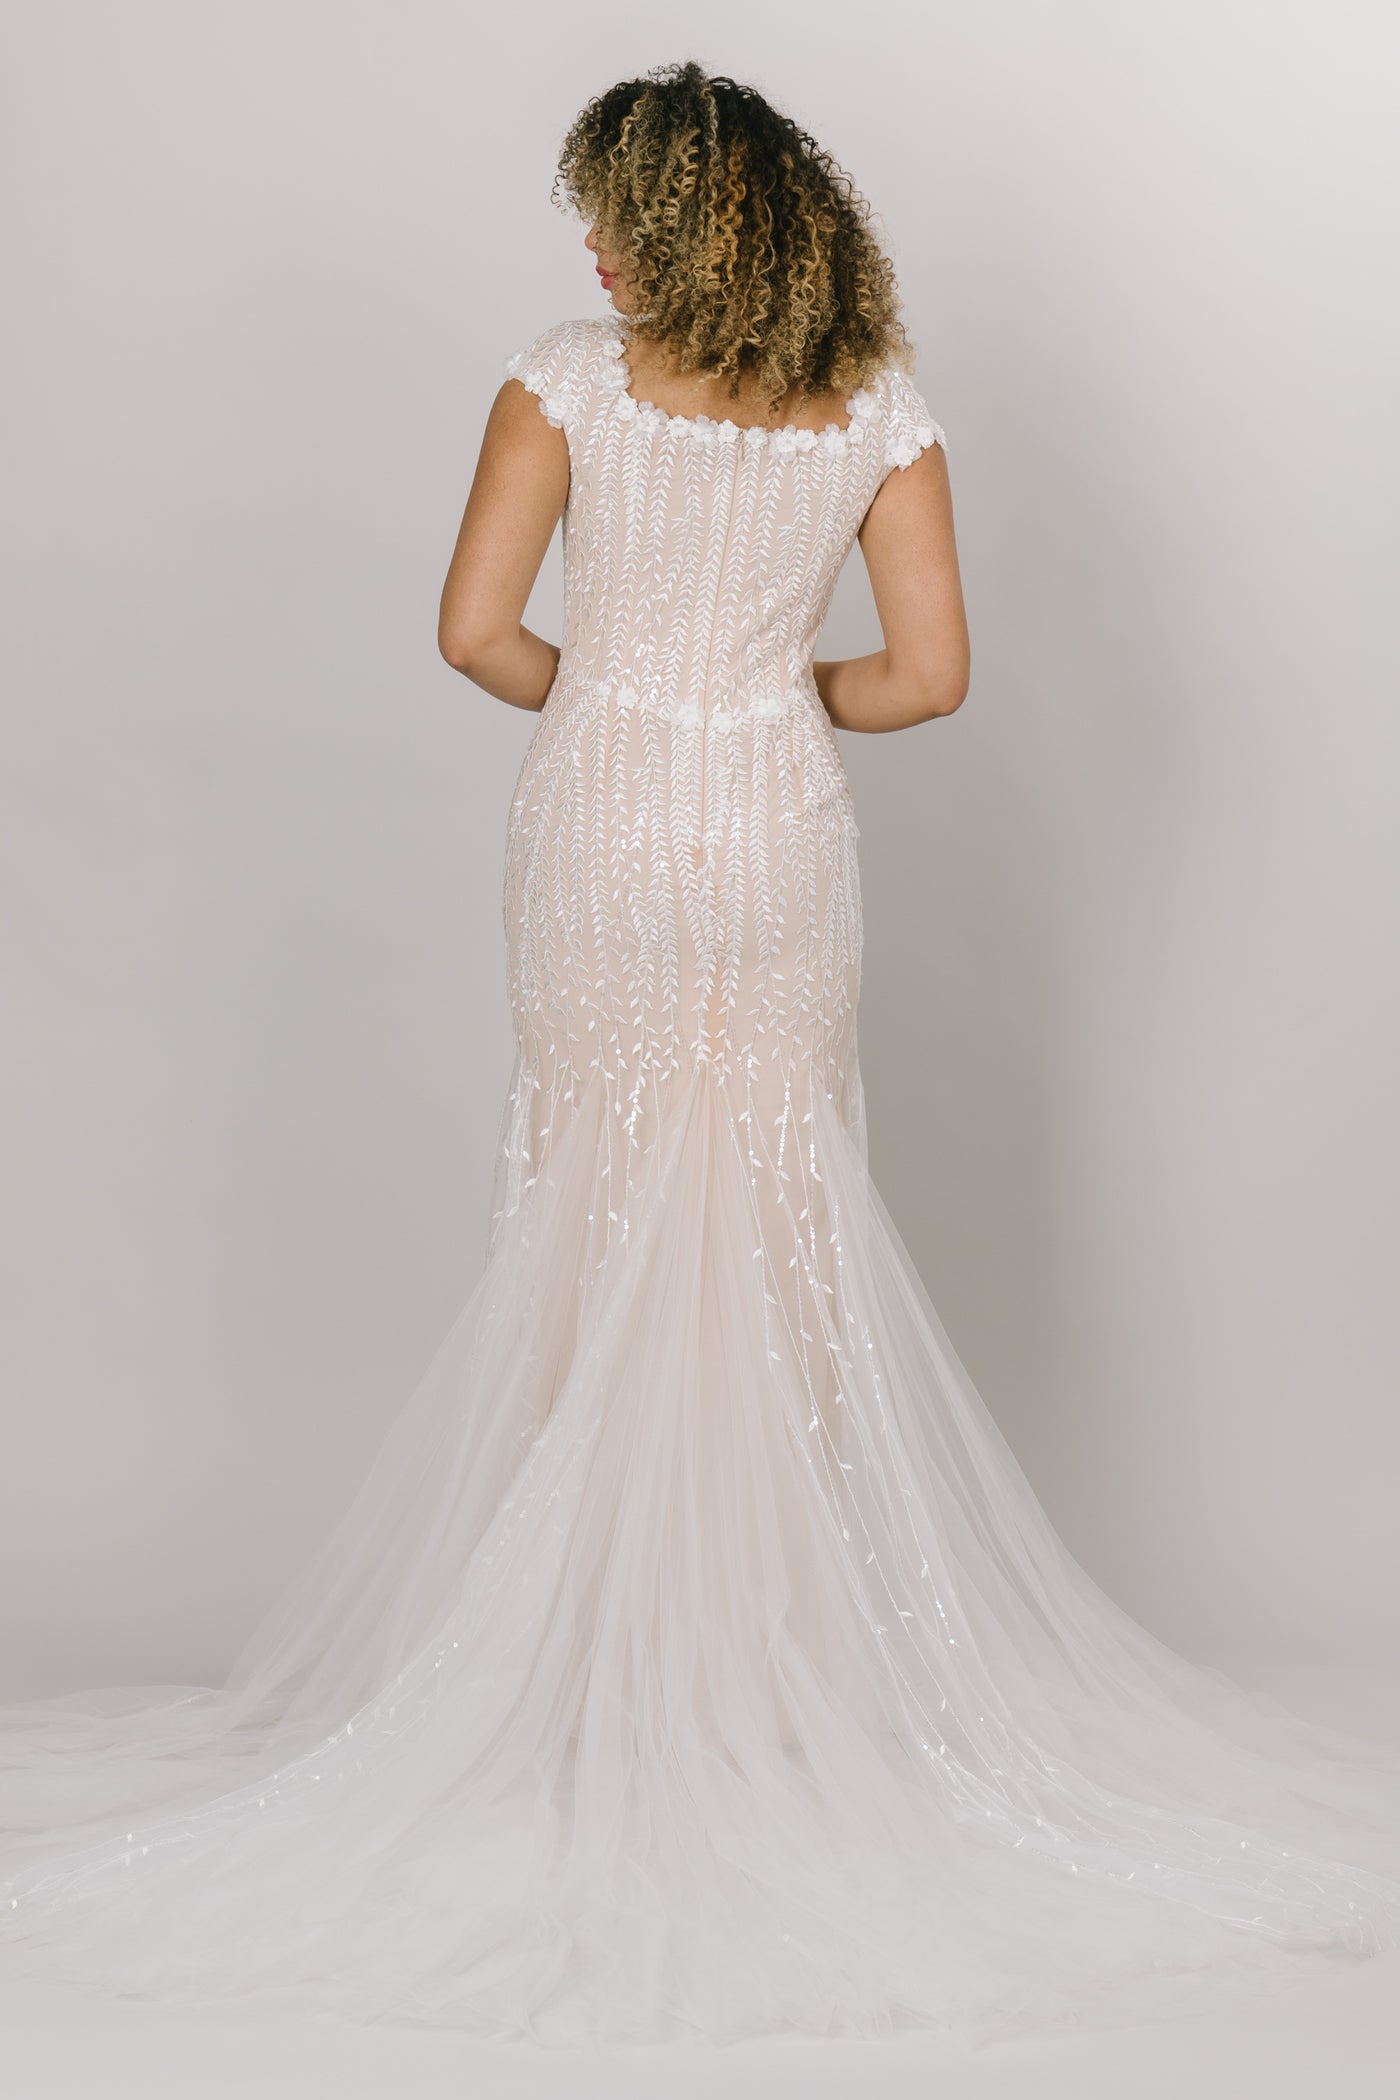 Back view of modest wedding dress, fitted silhouette with a square neckline. Champagne color underlining color with a delicate lace overtop.  